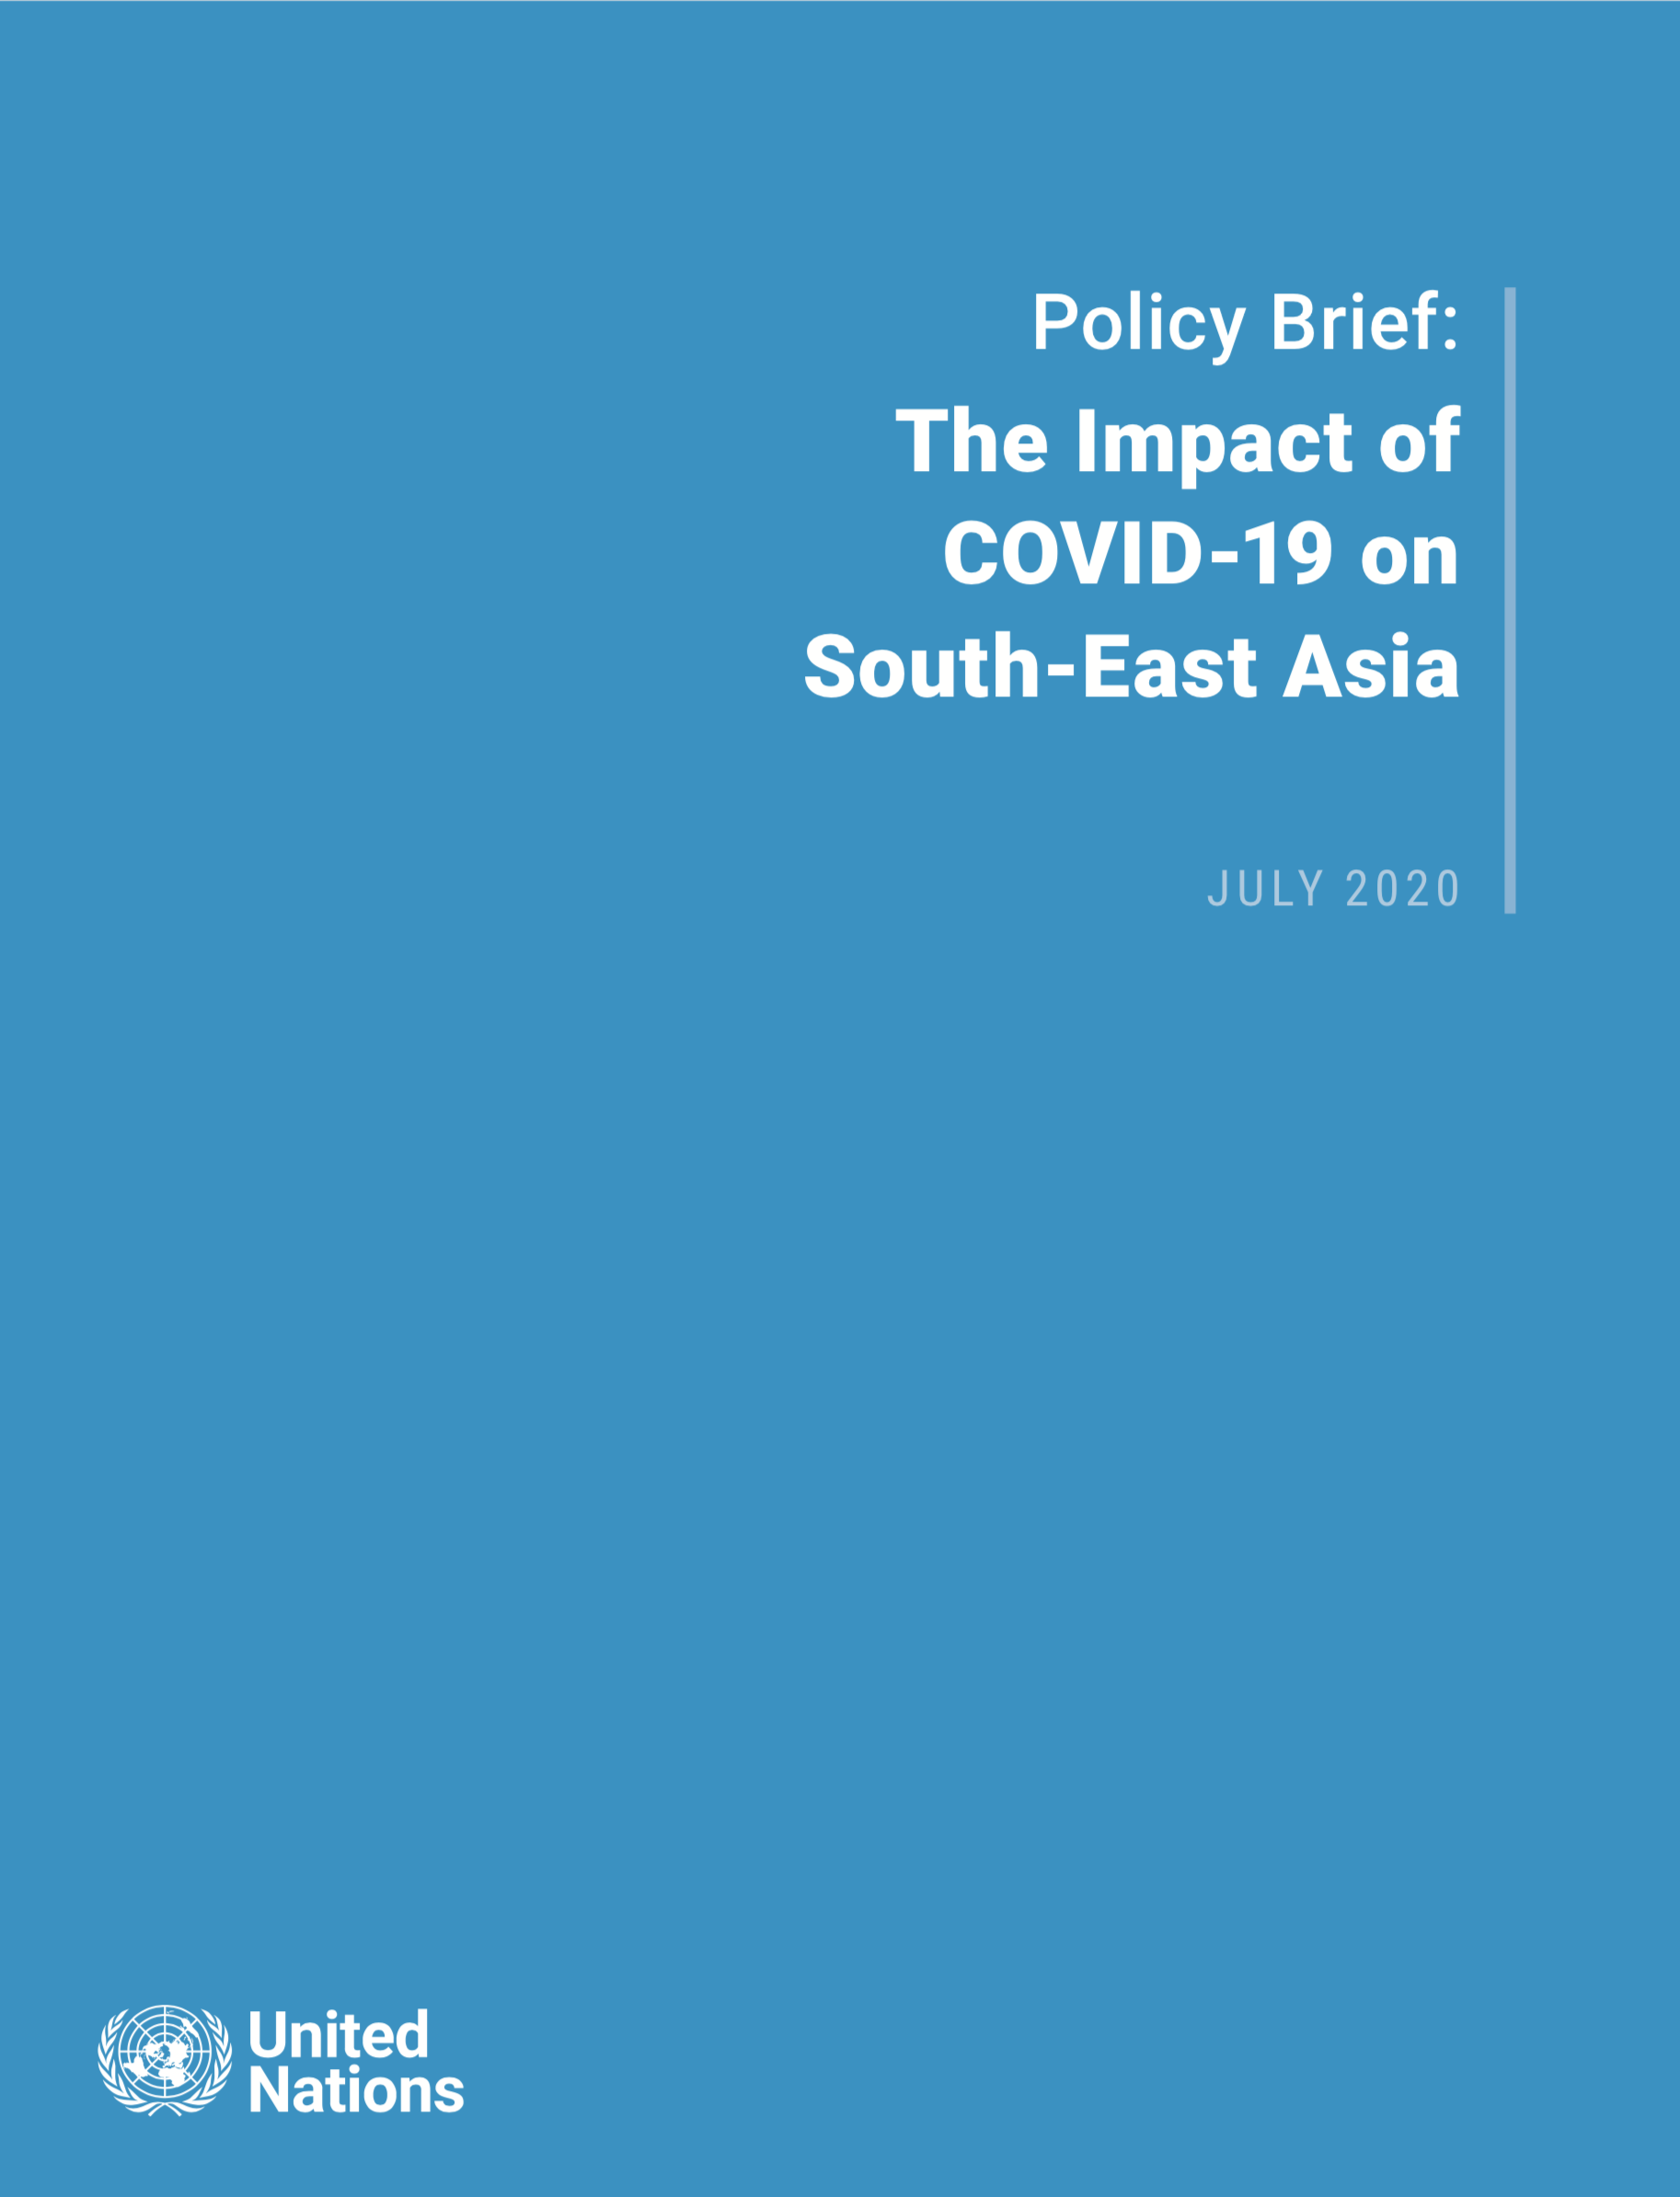 UN Secretary-General's Policy Brief on the Impact of COVID-19 on Southeast Asia